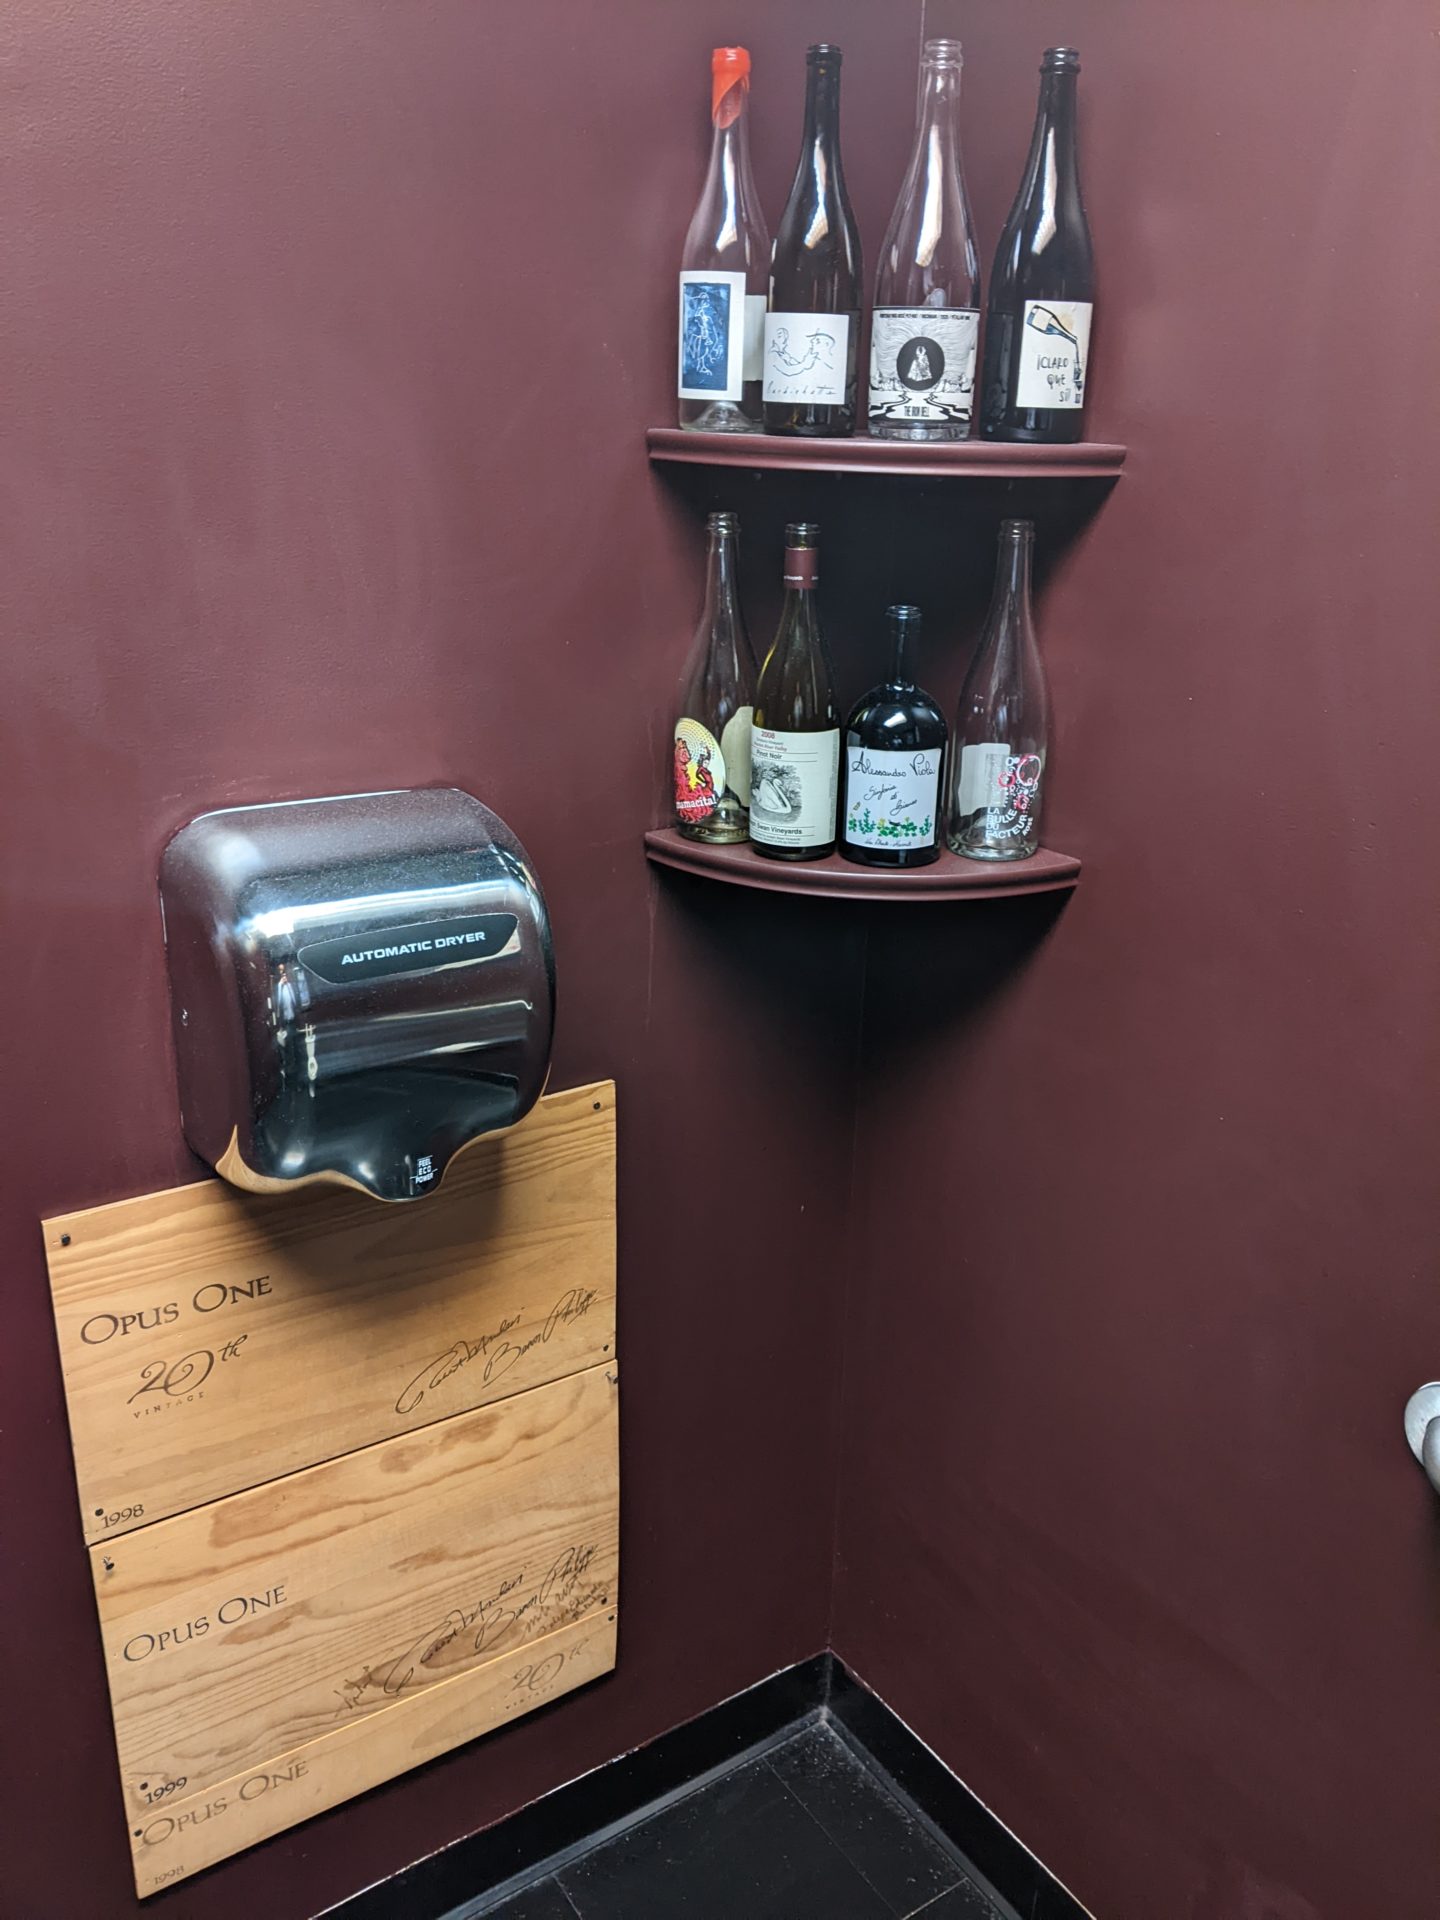 The corner of a room with dark burgundy walls. There are two corner shelves that are filled with empty wine bottles. On one wall there is a stainless steel hand dryer, with two wooden panels attached the wall below it.